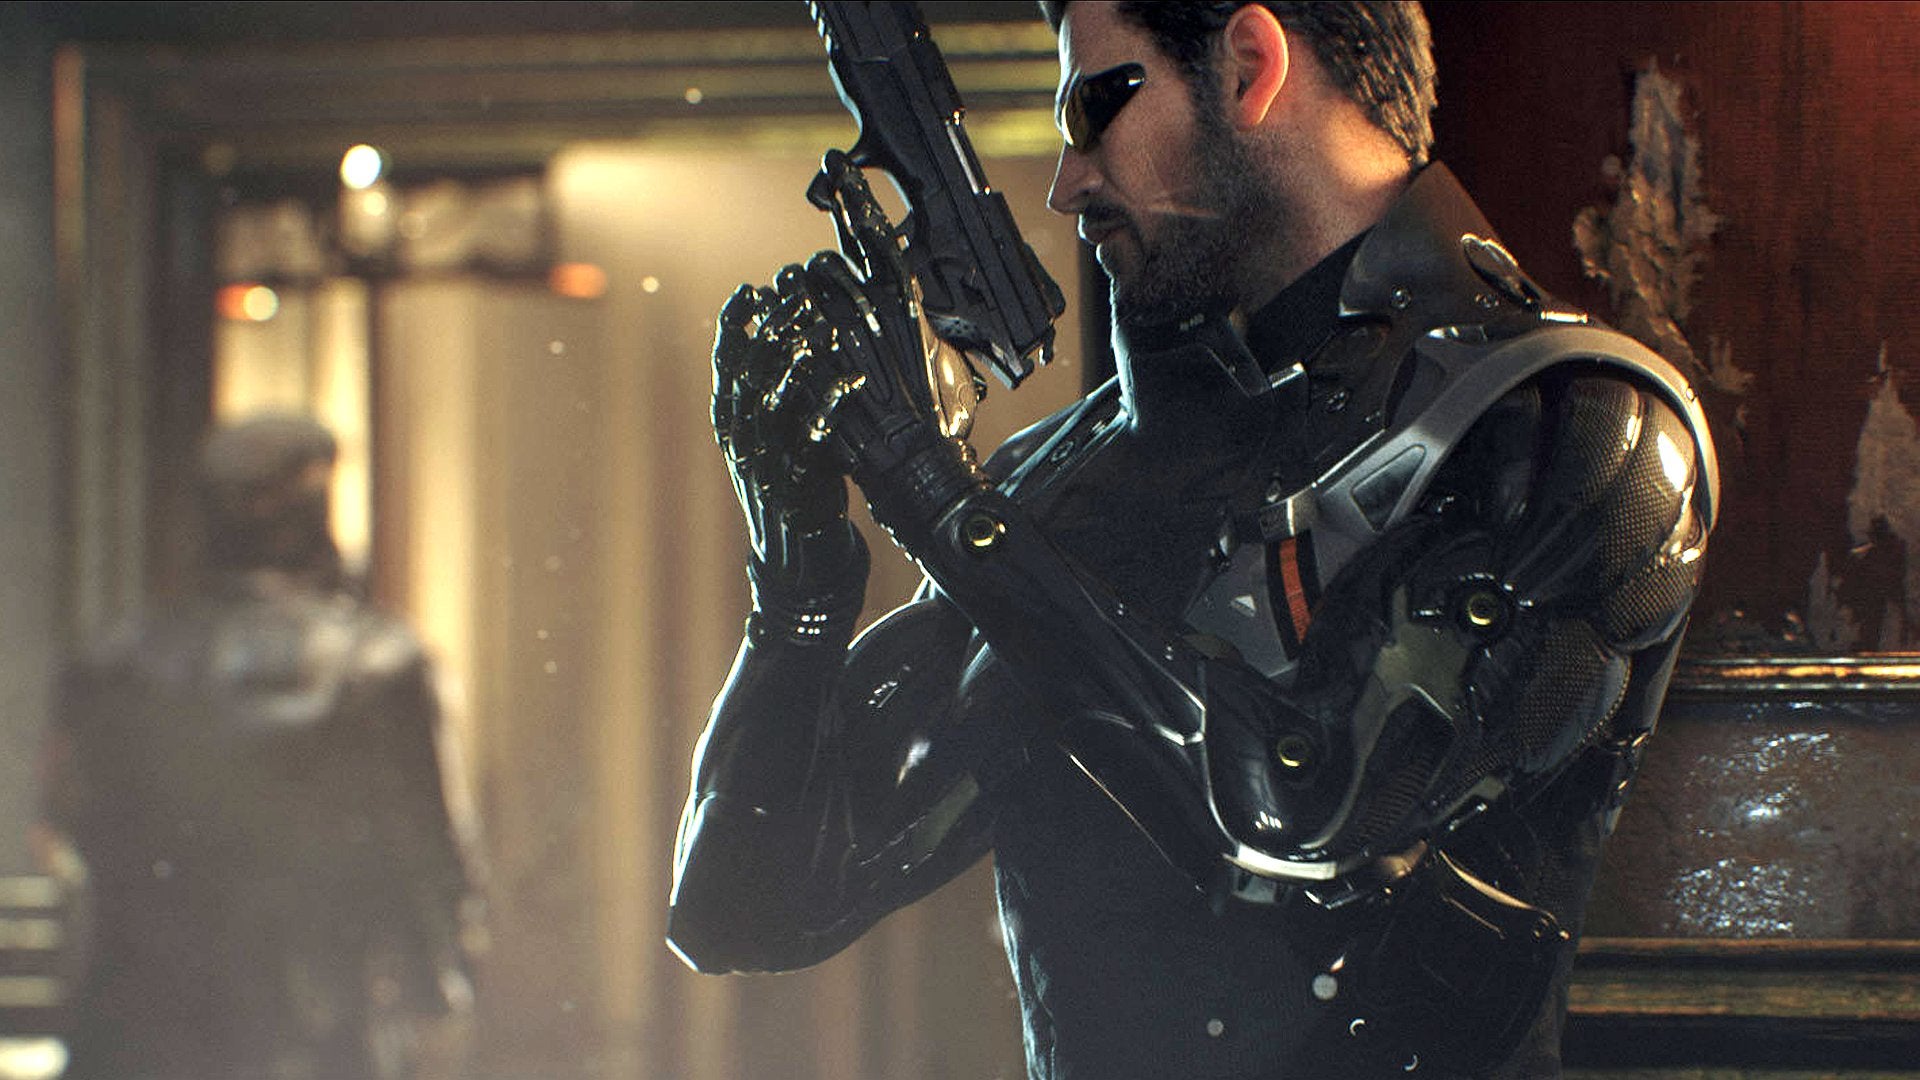 Image for “They were going to make the sequel without Jensen” - inside Deus Ex with actor Elias Toufexis